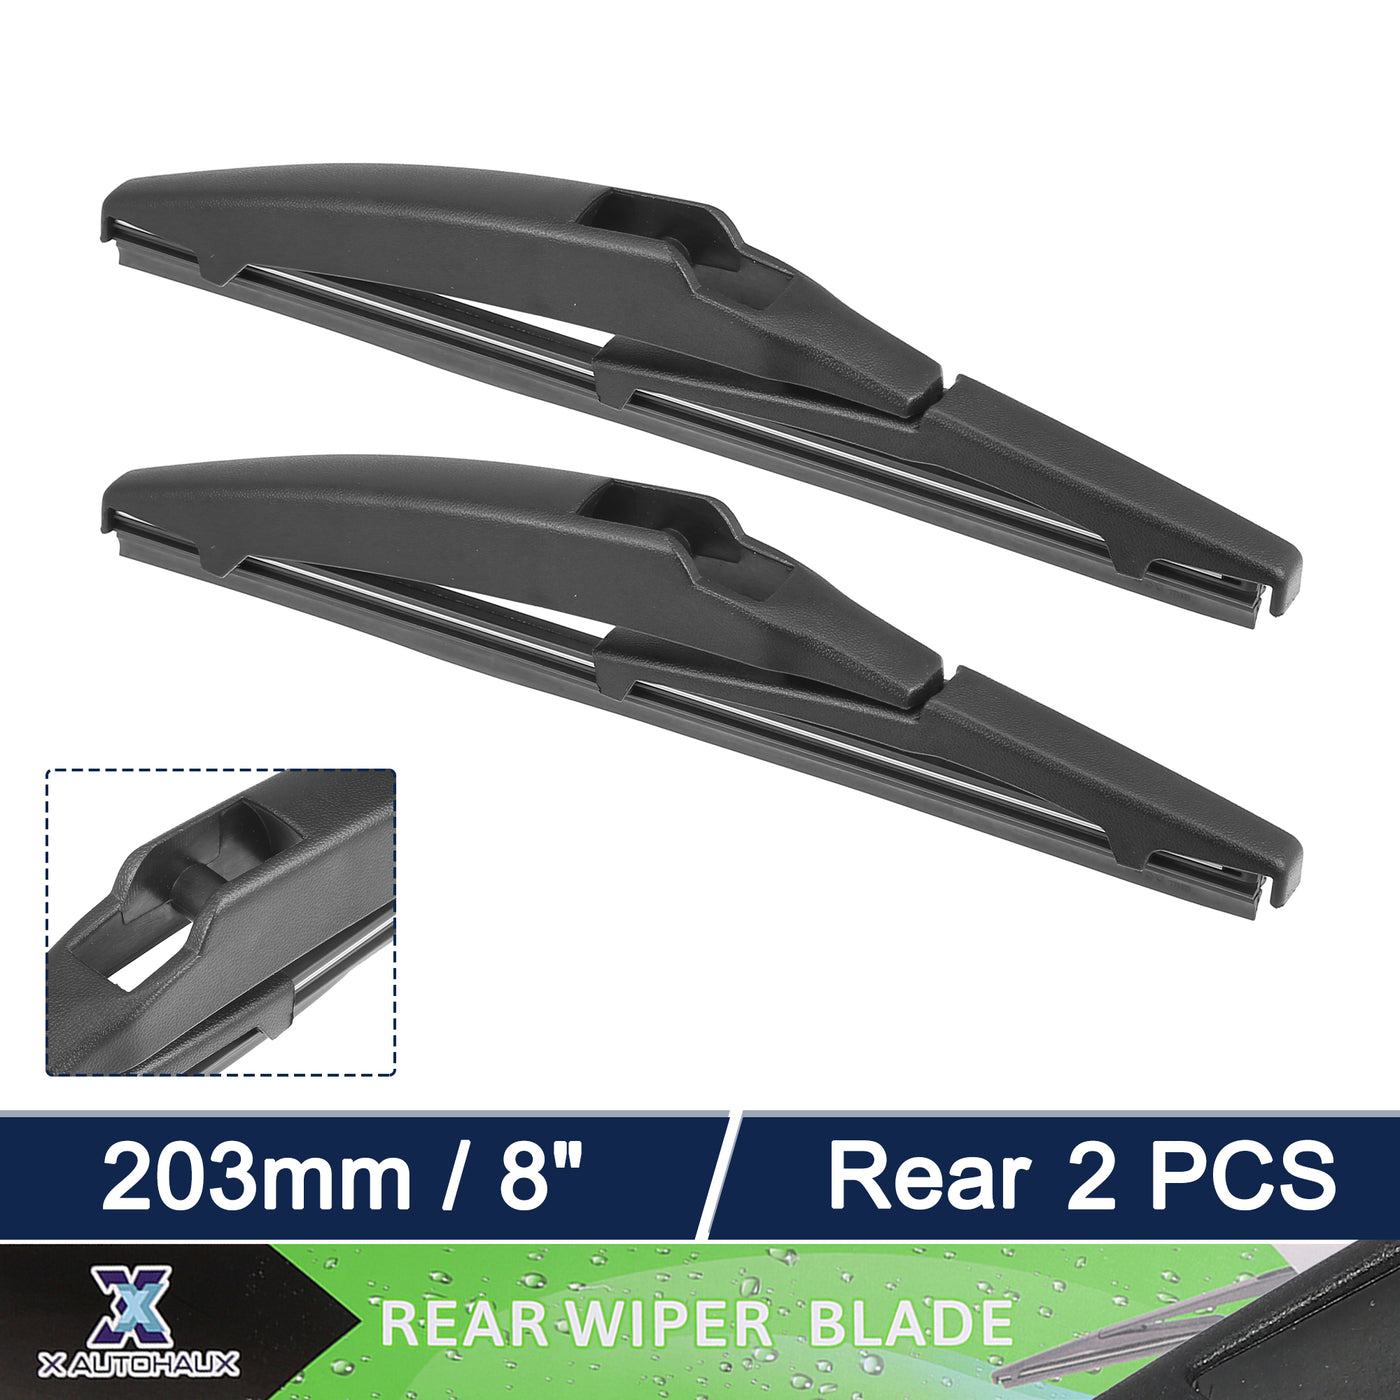 X AUTOHAUX 2pcs Rear Windshield Wiper Blade Replacement for Lexus CT200h 2011-2017 for Toyota Prius C 2012-2019 for Scion XD 2008-2014